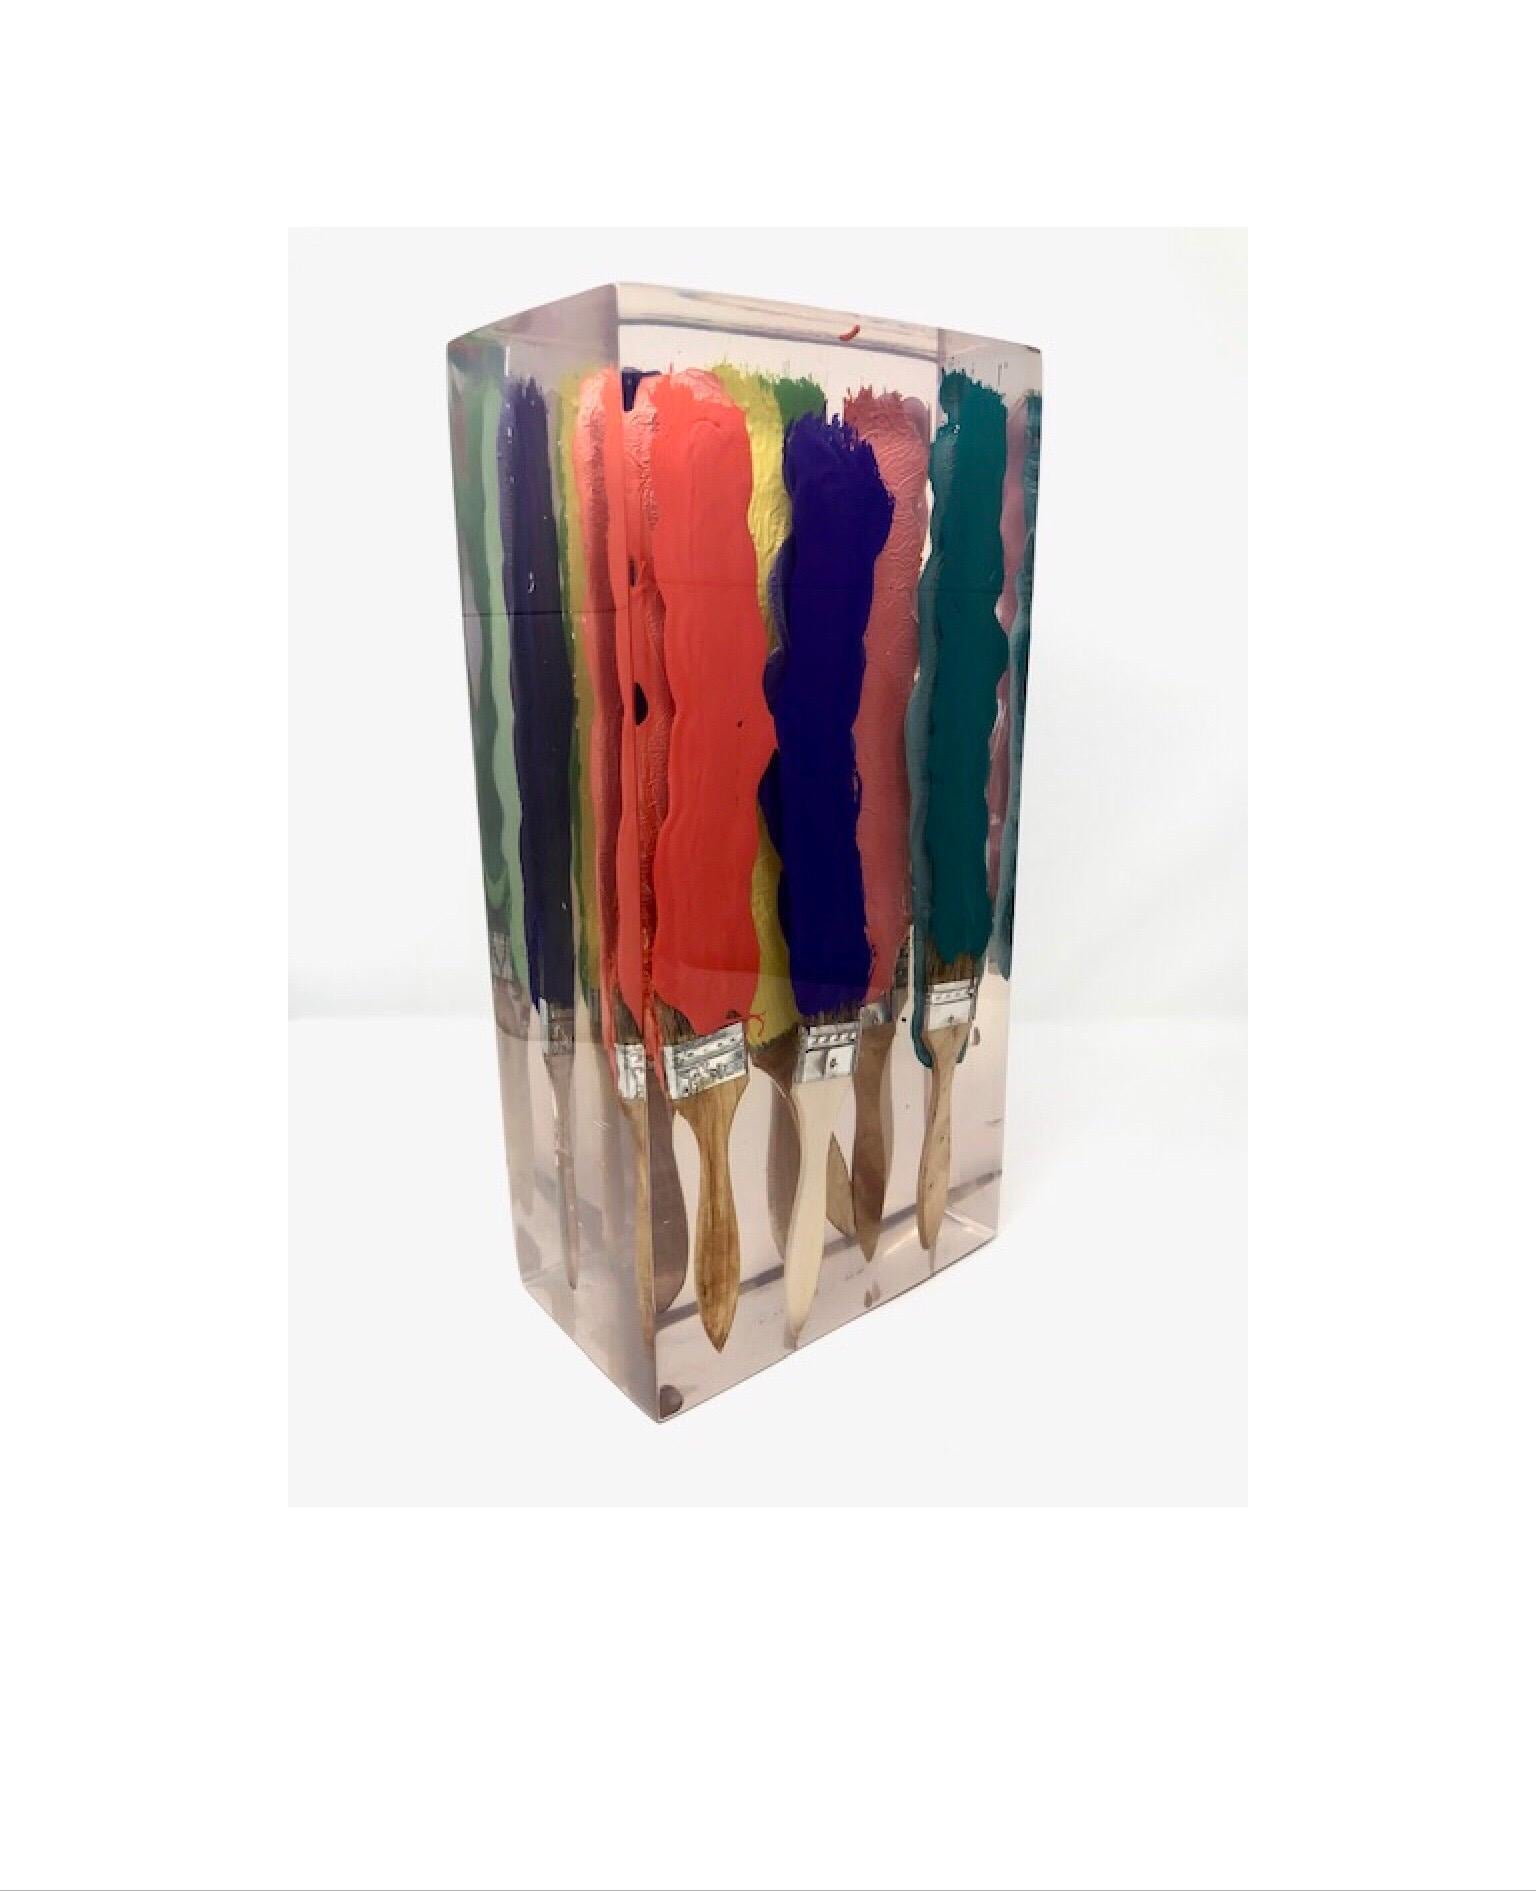 Add that touch of the unexpected with this whimsical art work of paint brushes emerged in resin. With the free floating illusion of the paint and brushes it is sure to start a conversation if placed in your home or office.